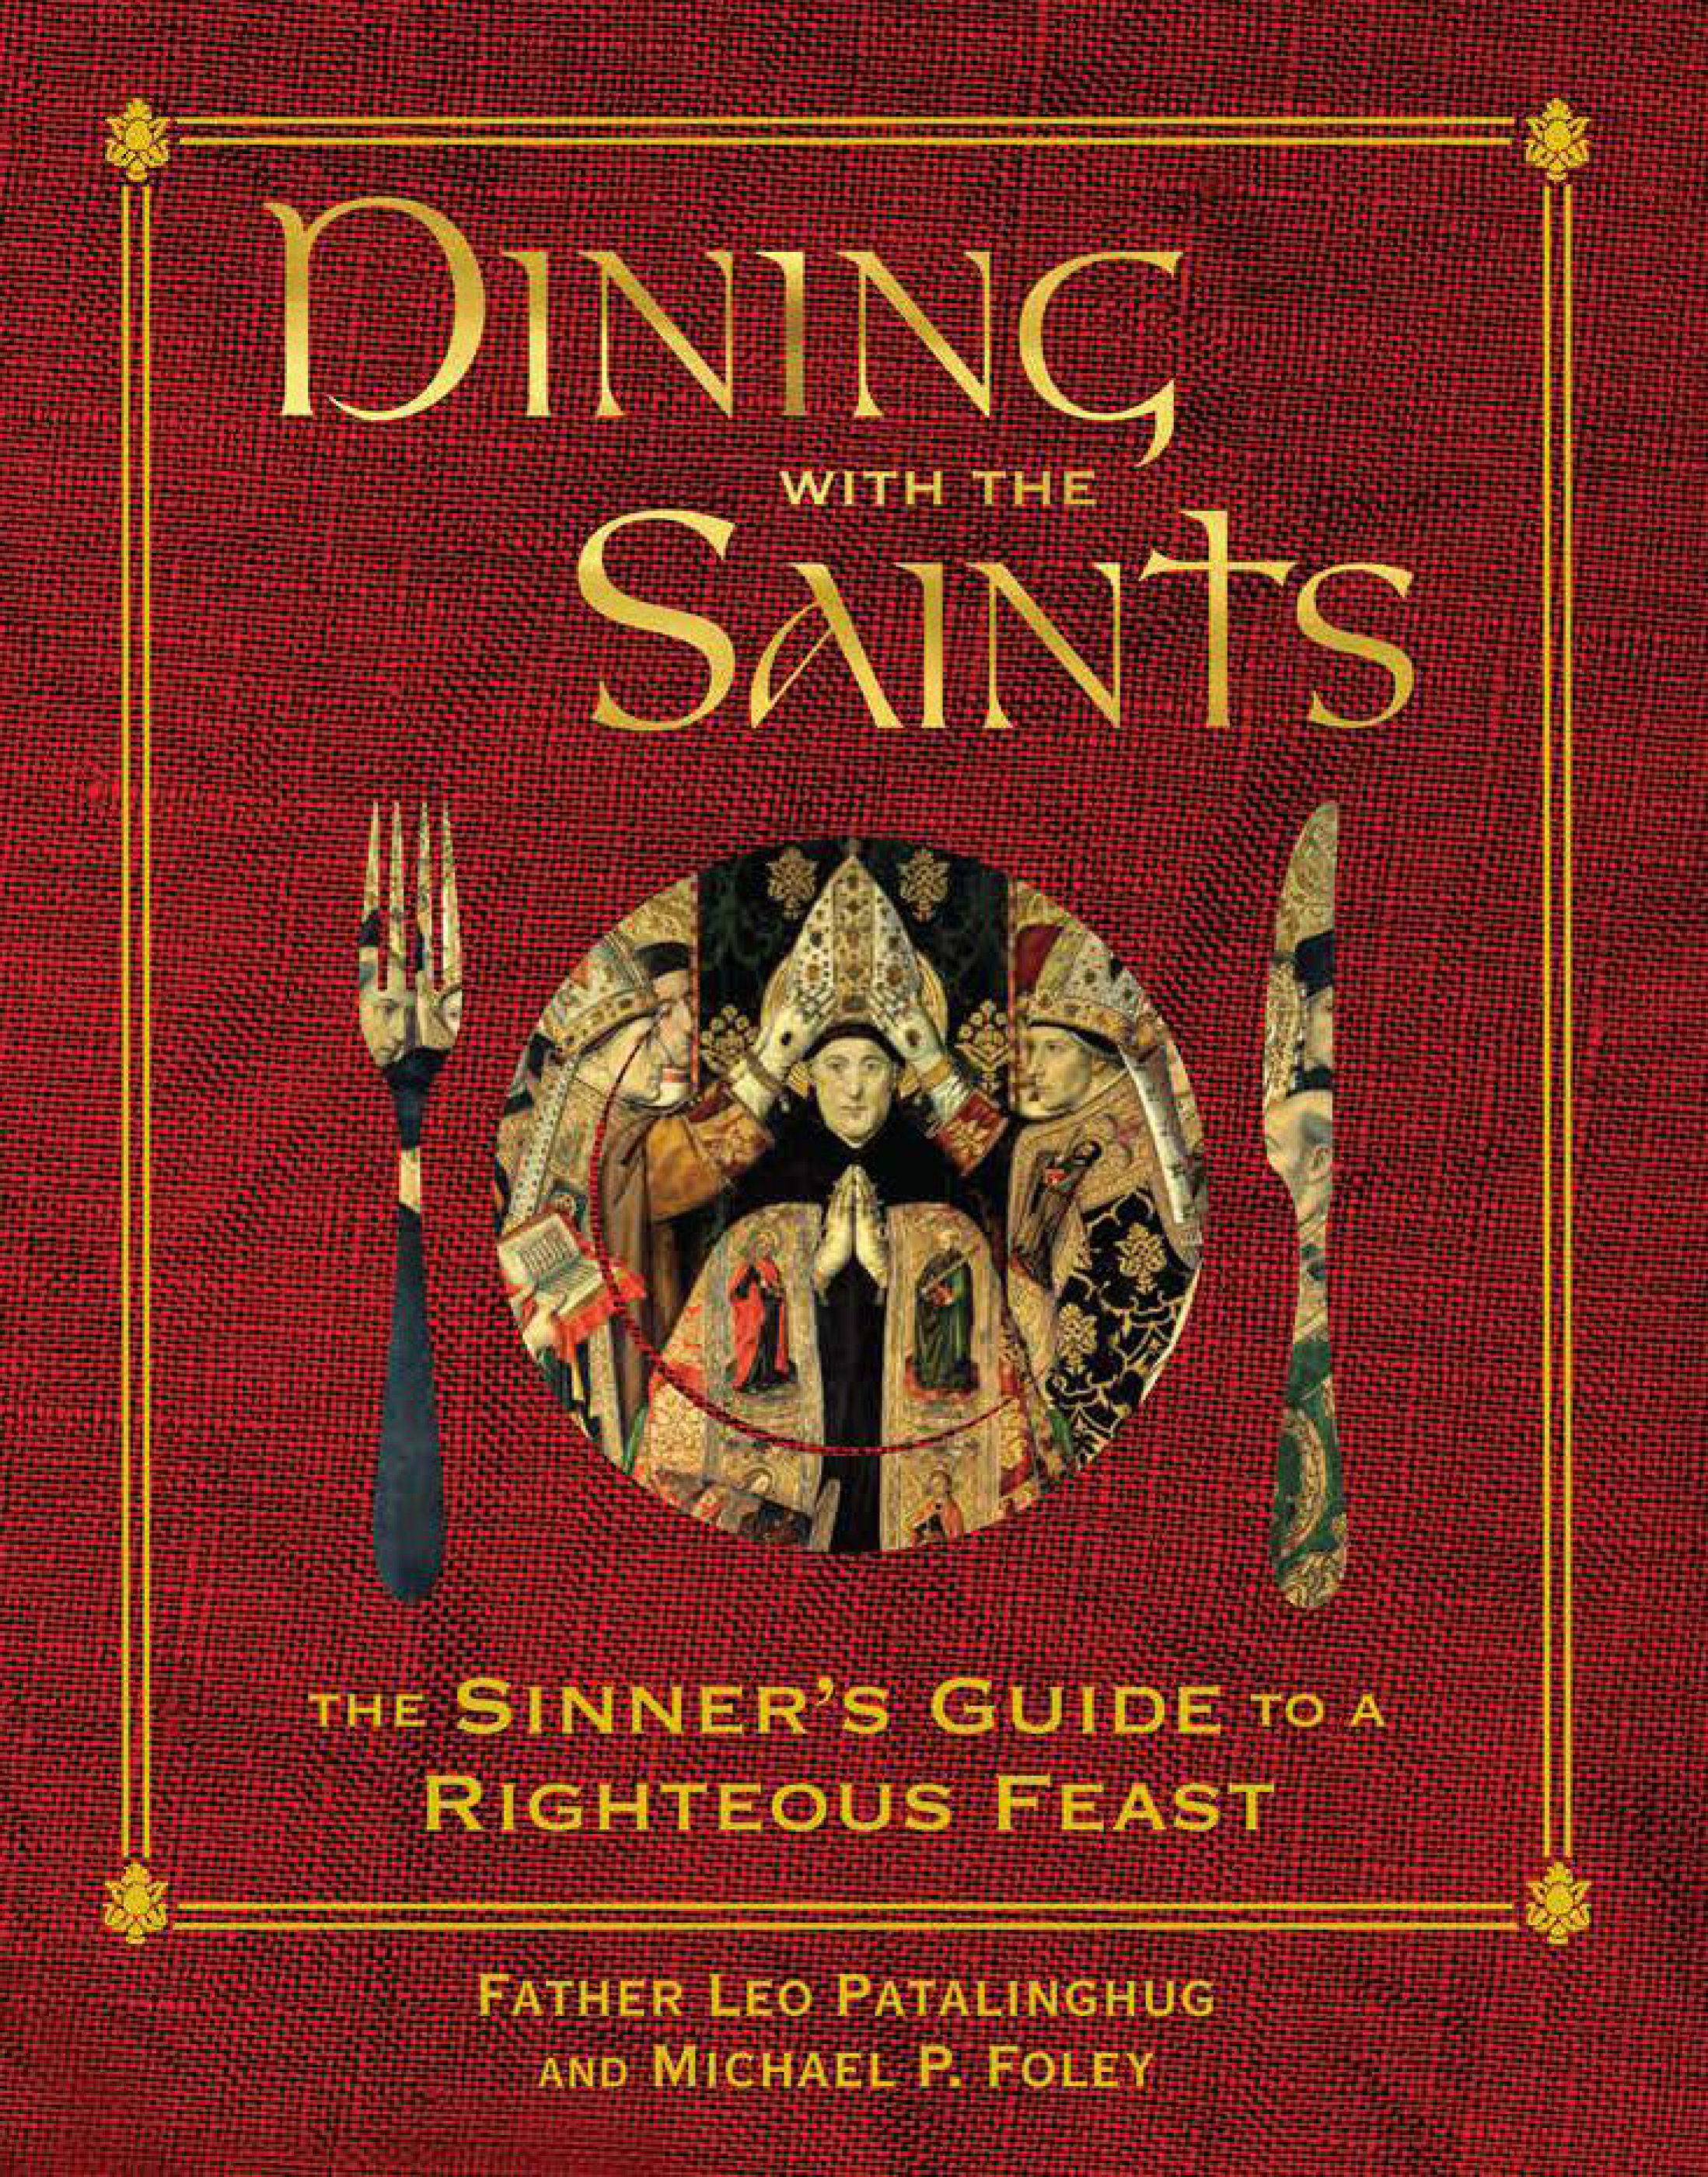 20230303 BSzyszkiewicz RECIPE and BOOK REVIEW DINING with the Saints-Cover